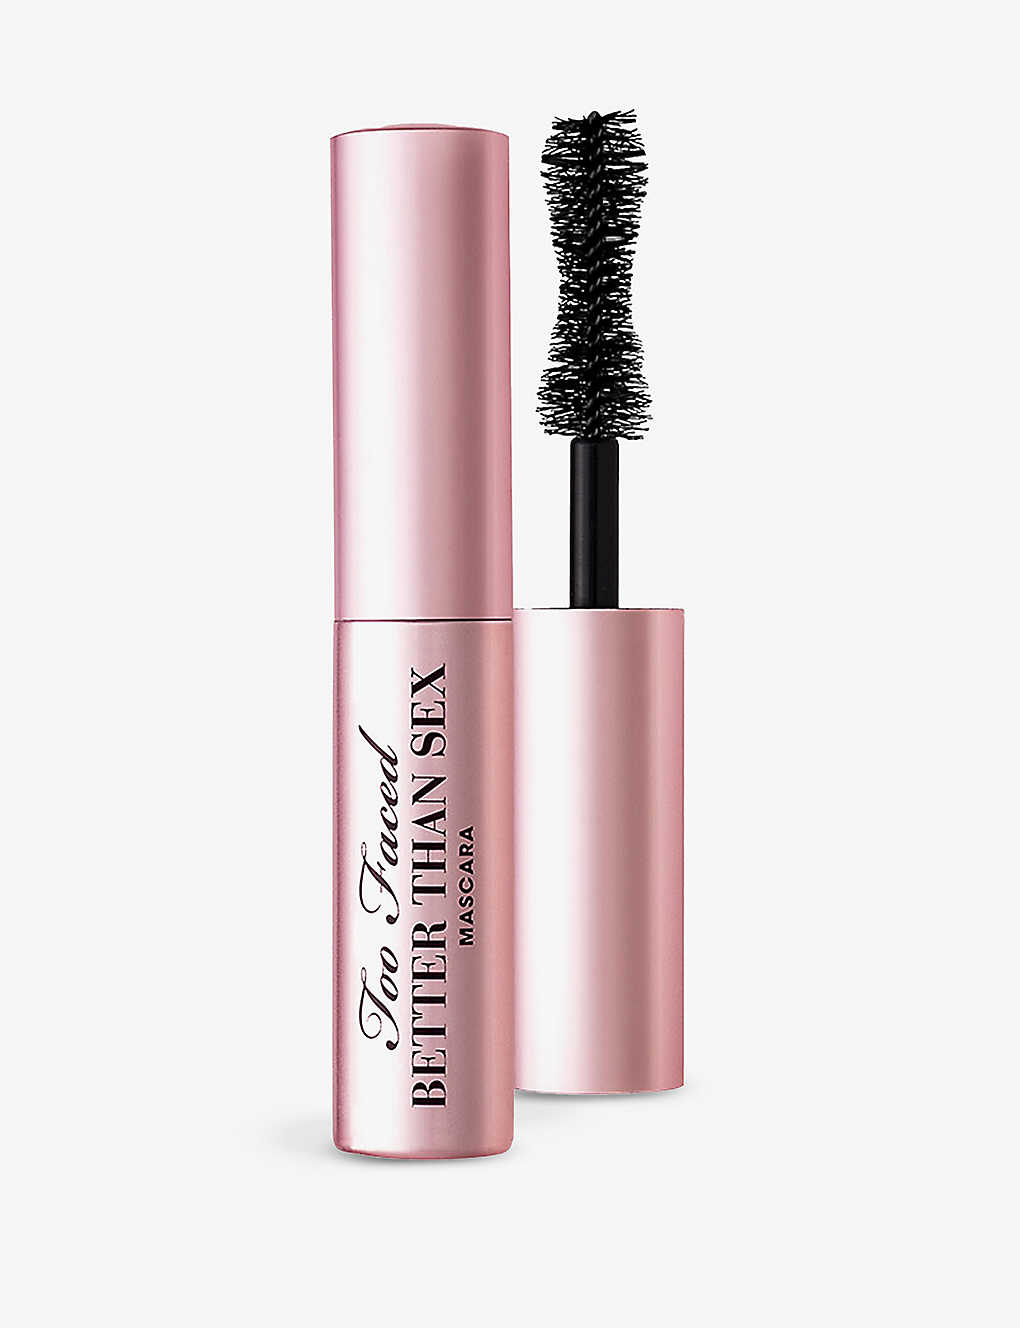 TOO FACED TOO FACED BETTER THAN SEX DOLL-SIZE MASCARA 4.8G,84379238